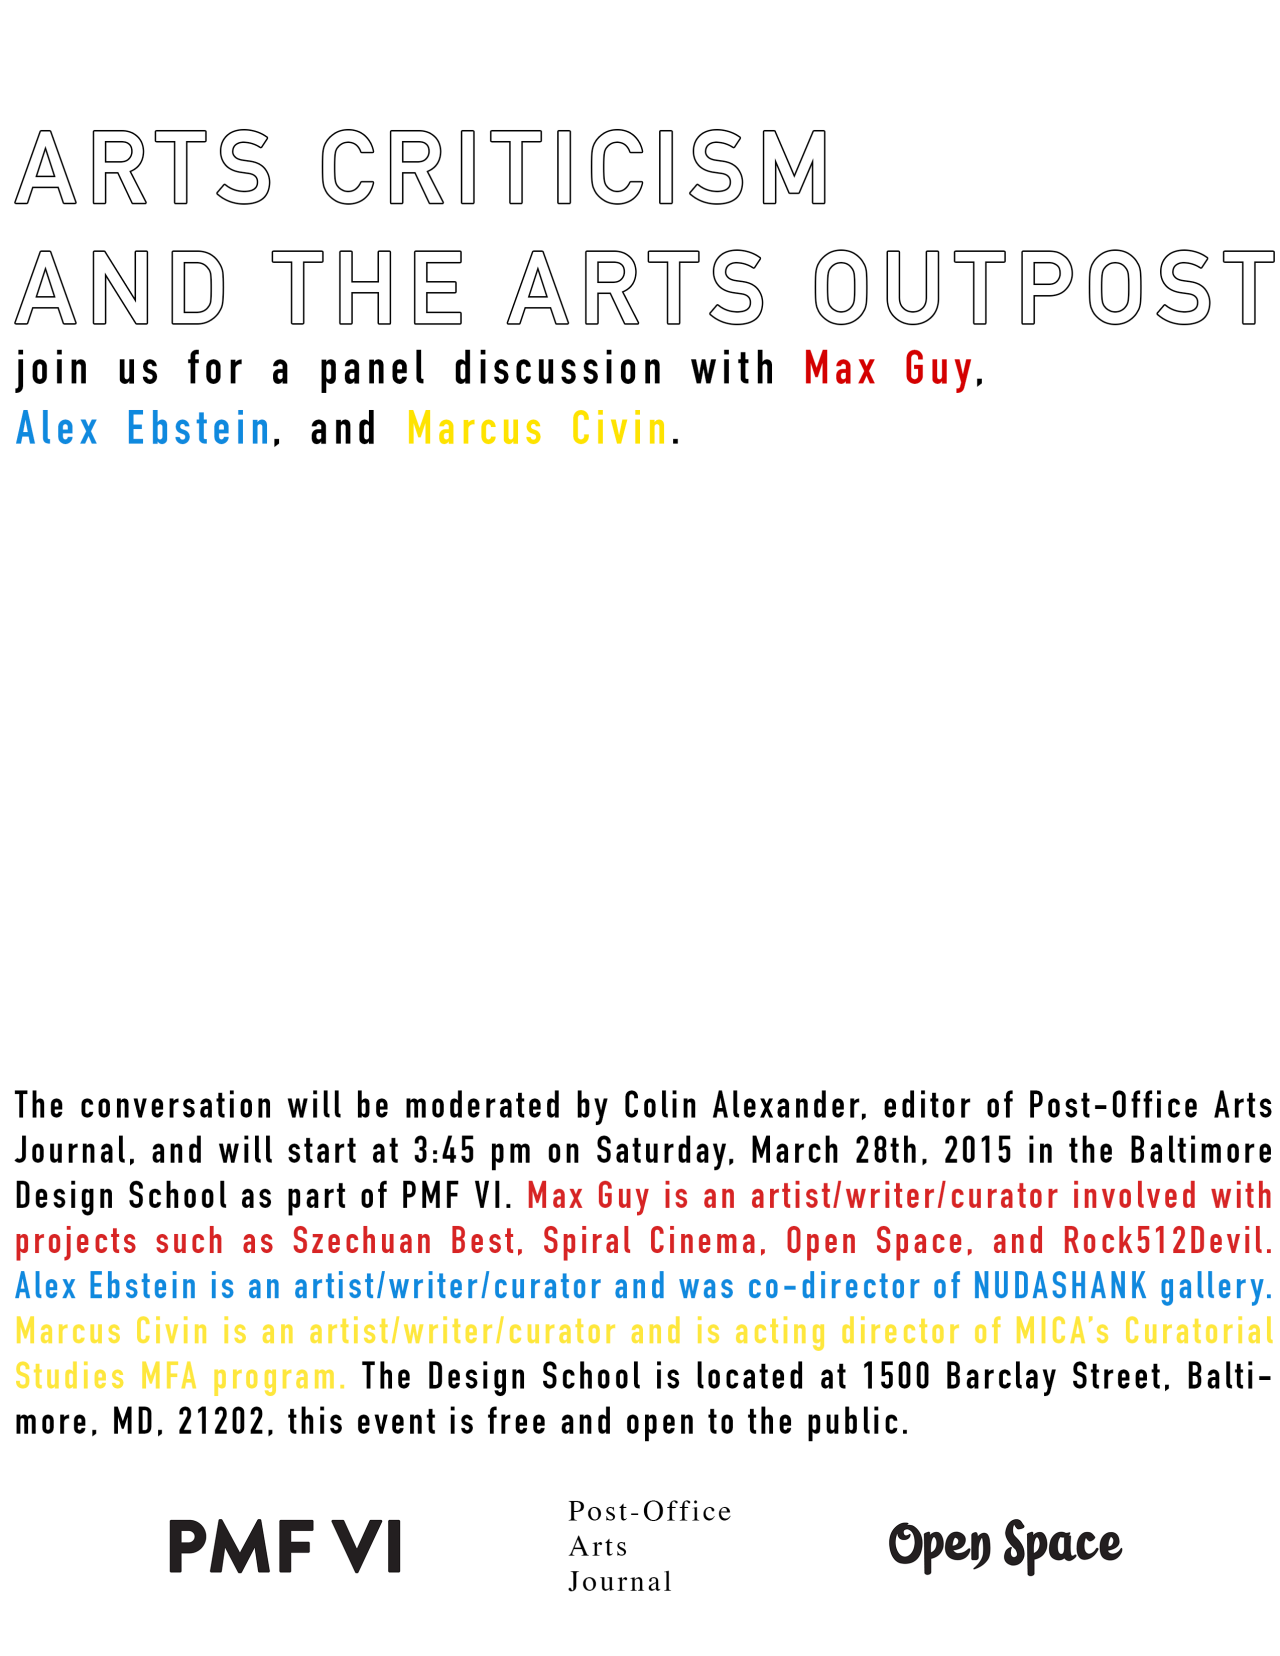 Join us for a panel discussion with Max Guy, Alex Ebstein, and Marcus Civin at PMF next week on the topic of “Arts Criticism and the Arts Outpost.” The conversation is going to cover questions surrounding the roles of subjectivity, audience, criticality, and market in the non-capitals of the art world.